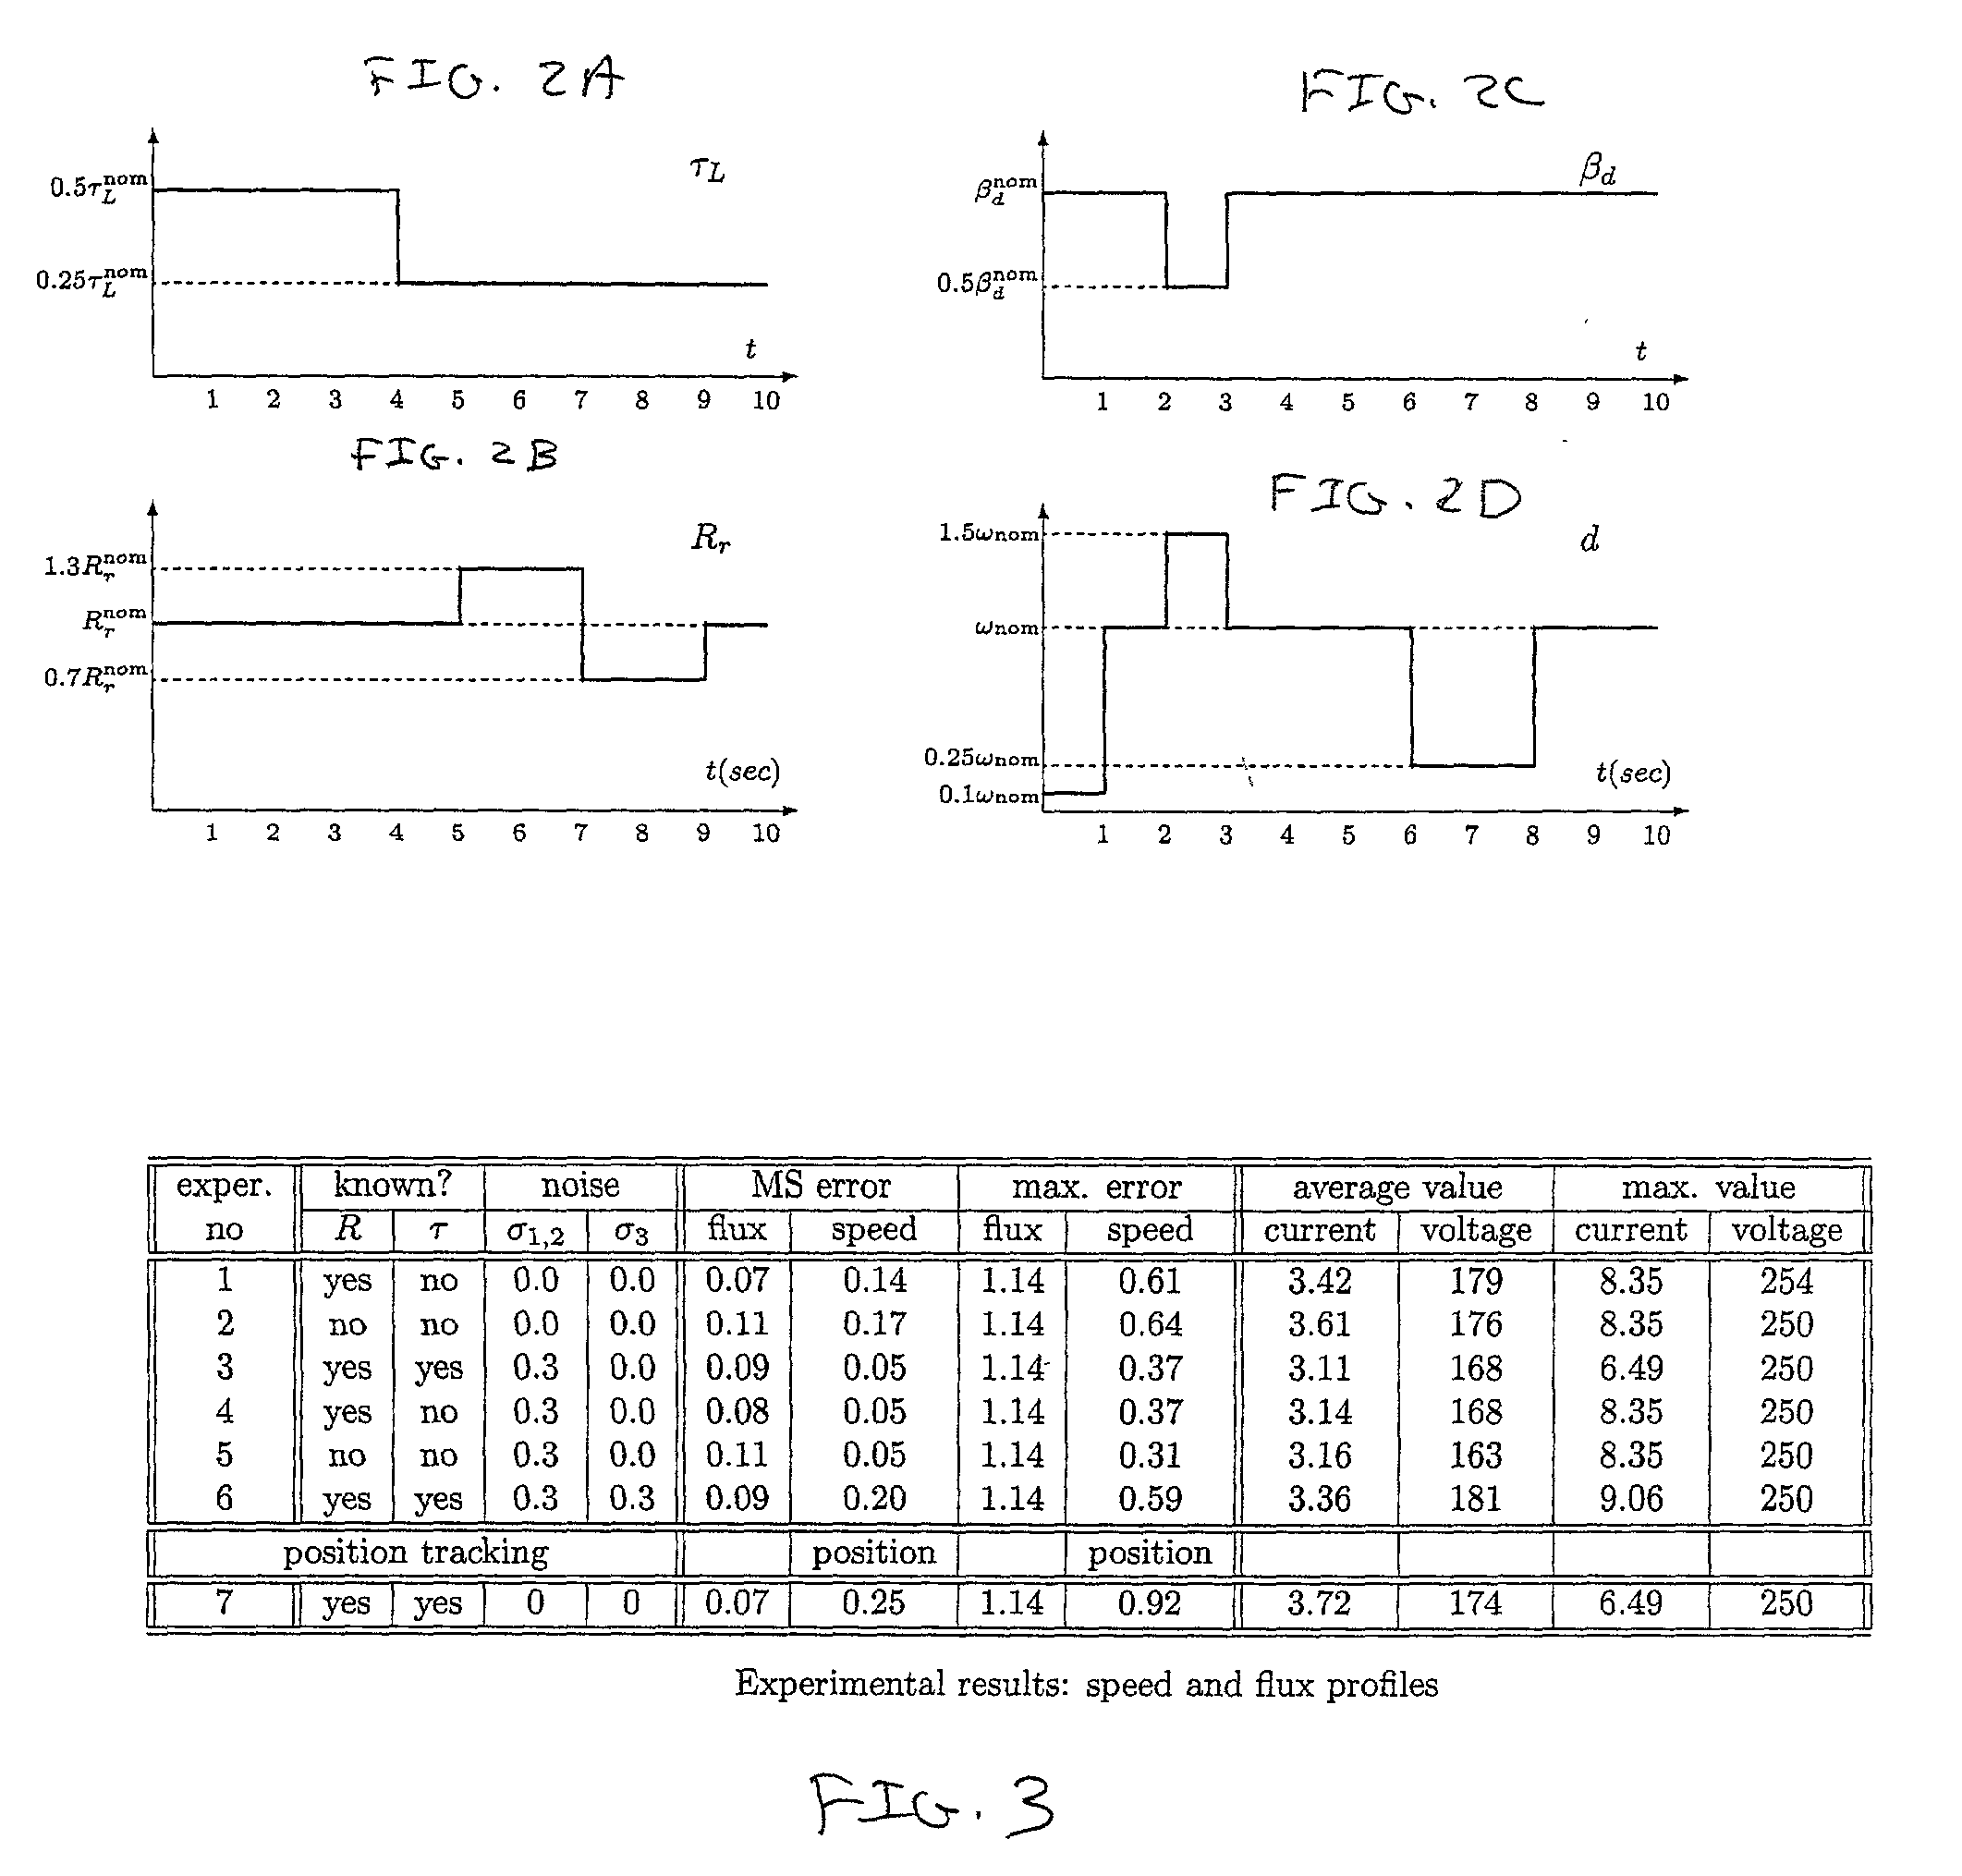 Discrete-time system and method for induction motor control